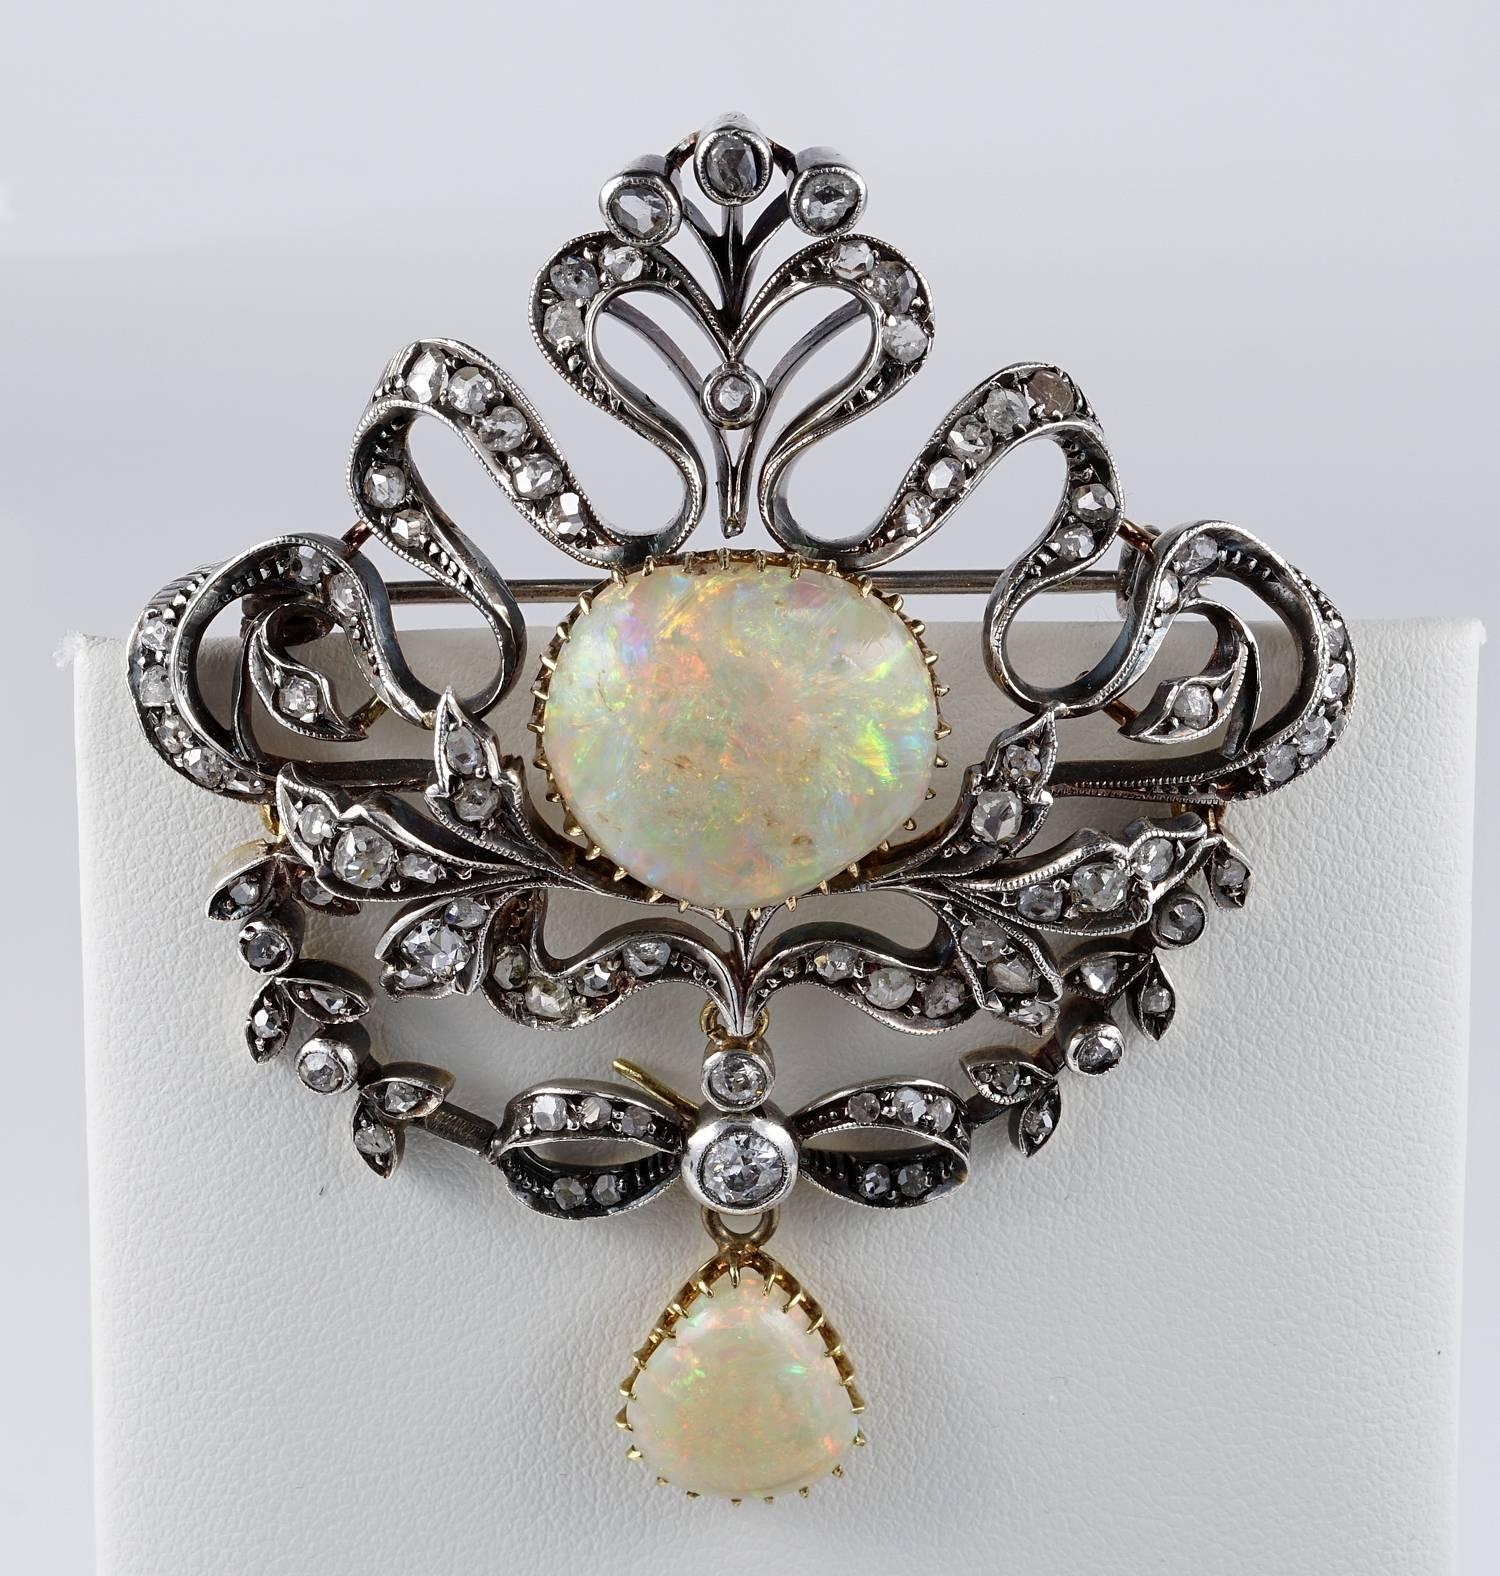 Magnificent and impressive authentic Victorian brooch crafted of solid 18 Kt gold topped by silver - not marked
Boasting along the royalty design a blaze of leaf and scroll work with bows and other motifs in vogue at the time -1880 ca -
fully